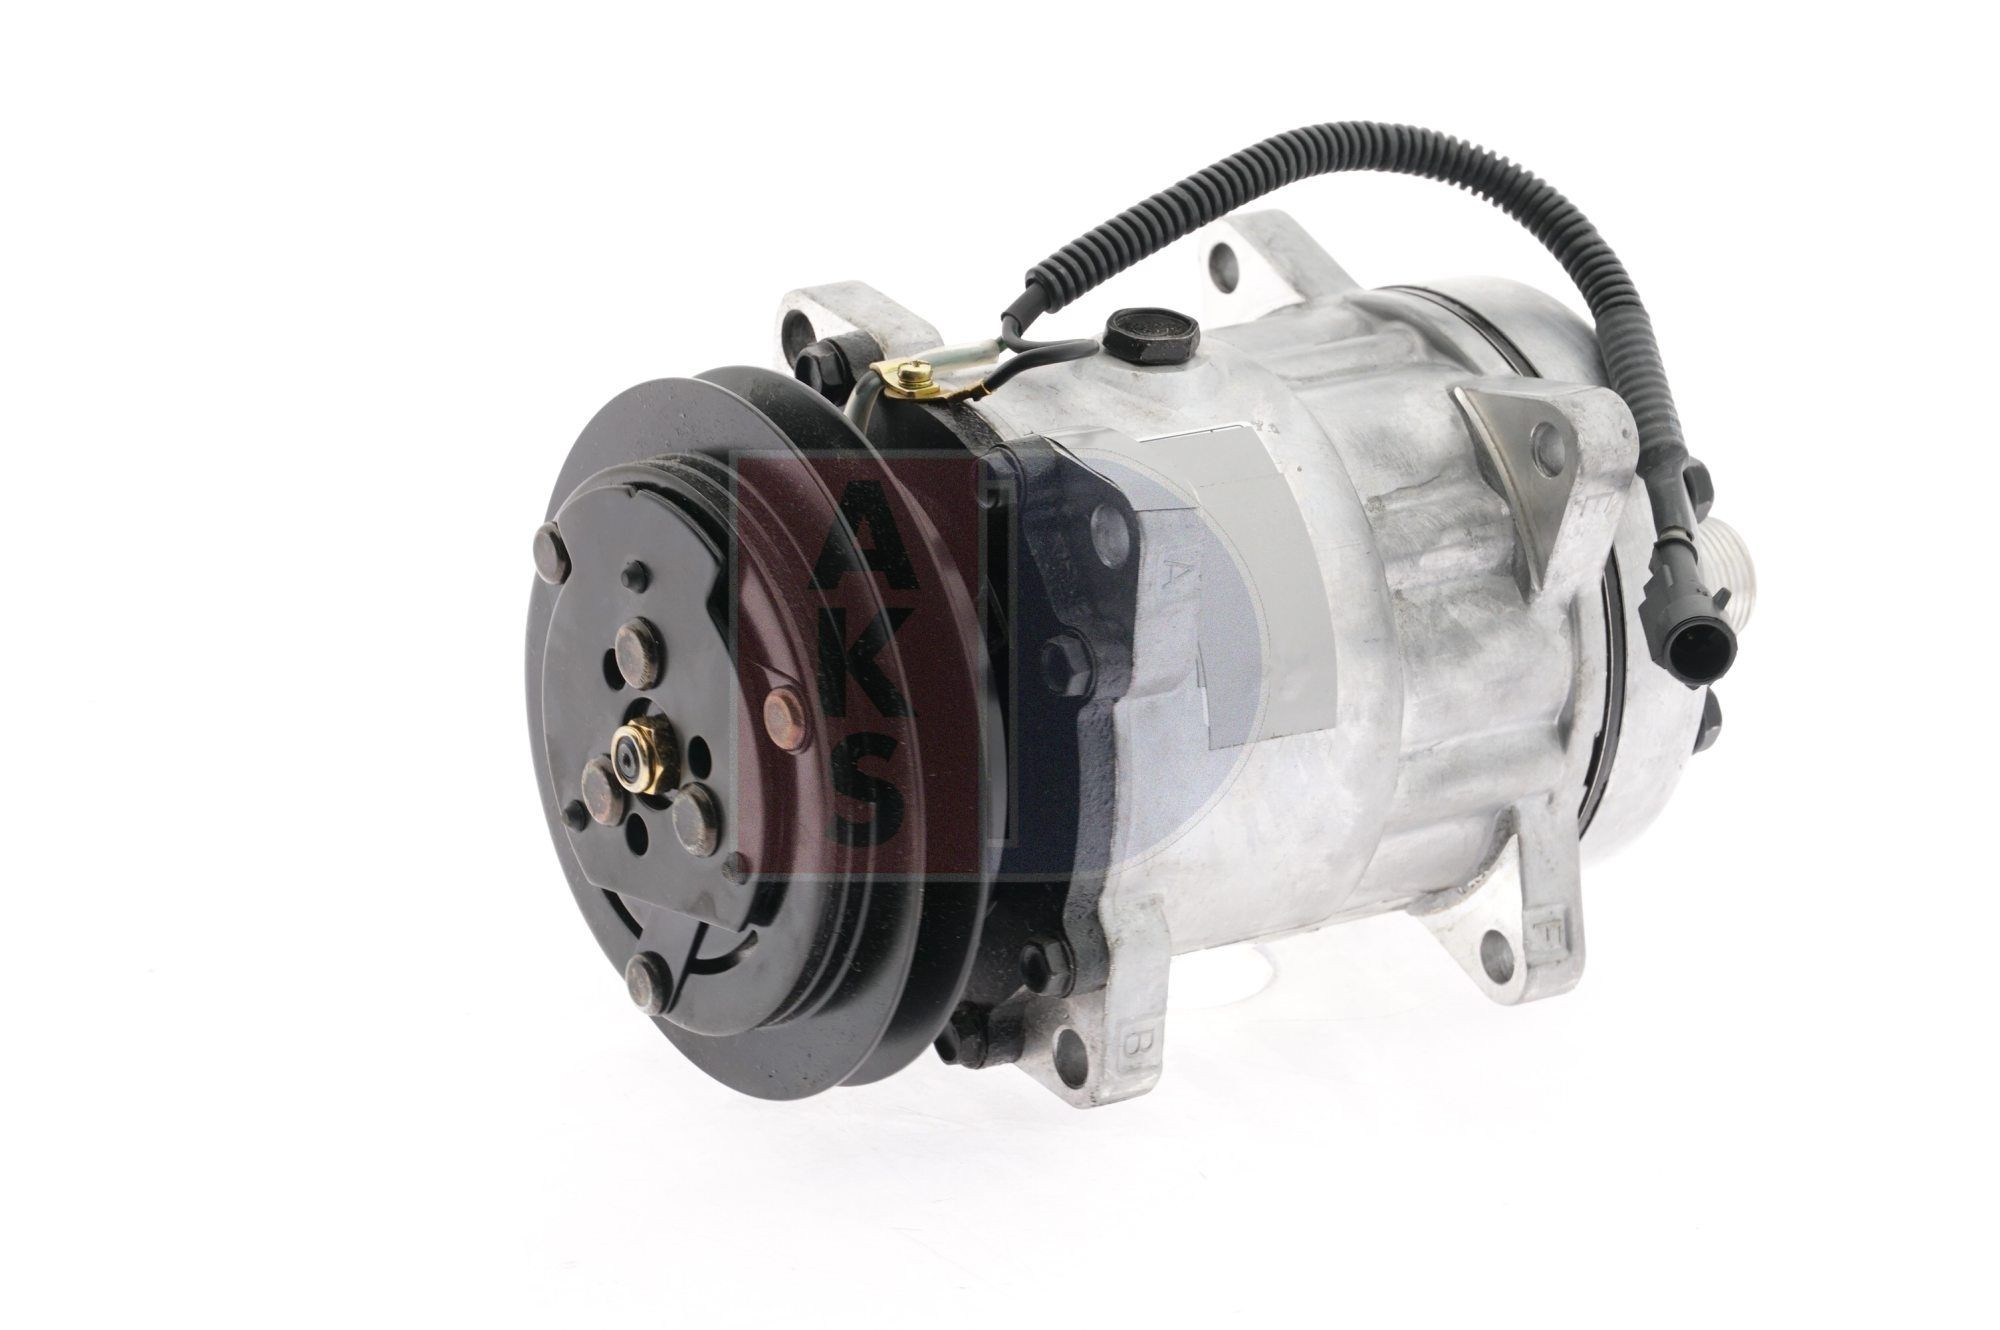 Air conditioning compressor 858270N from AKS DASIS